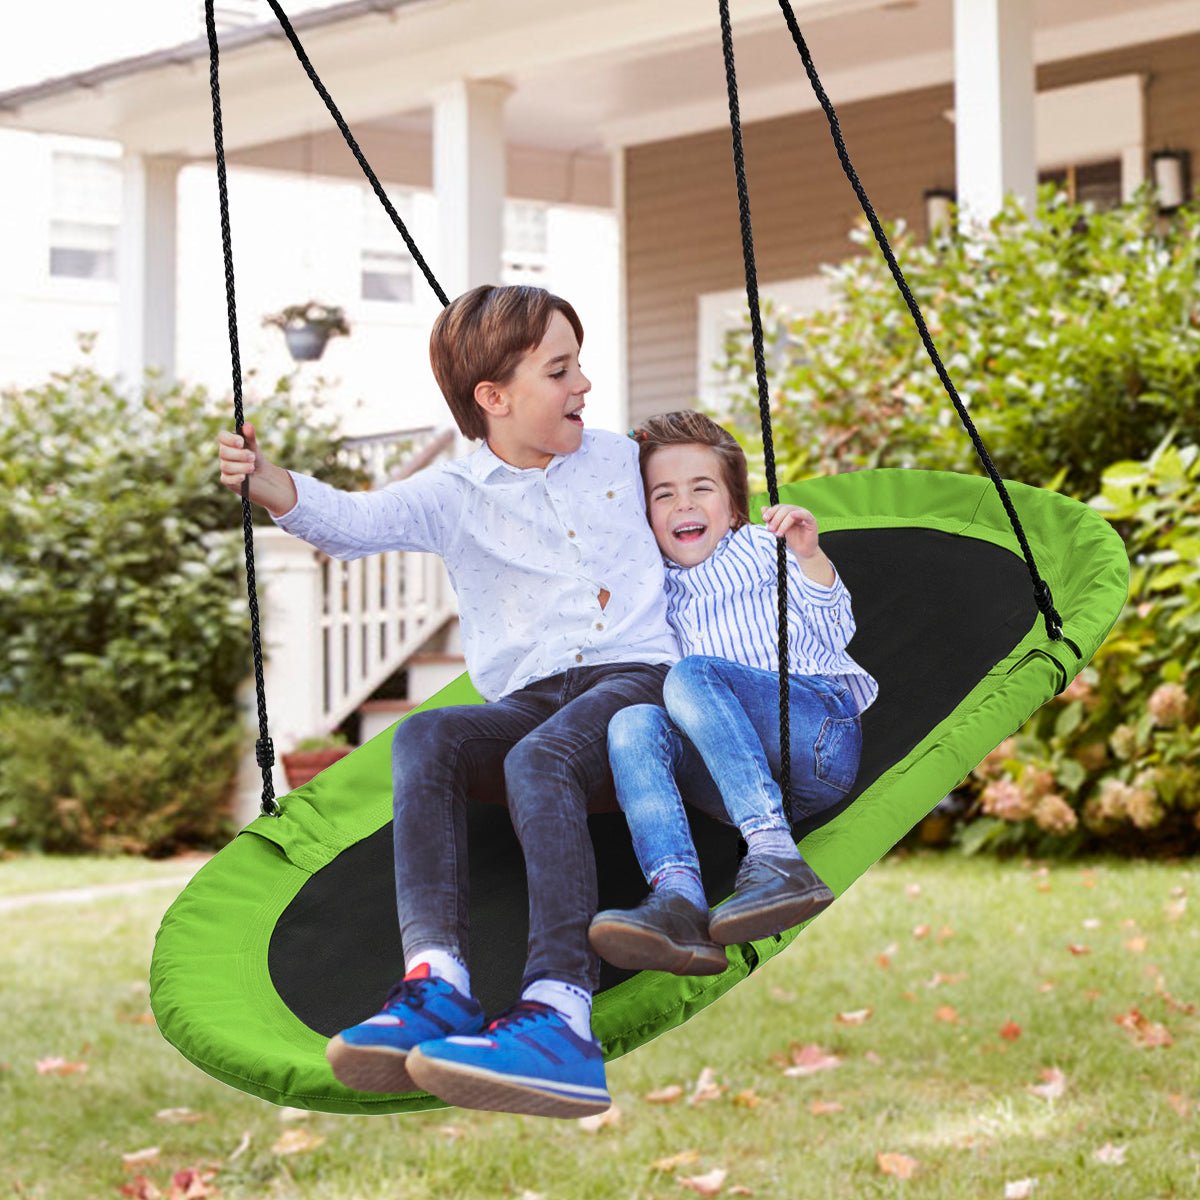 Flying Tree Swing: Oval Design with Adjustable Ropes for Outdoor Fun